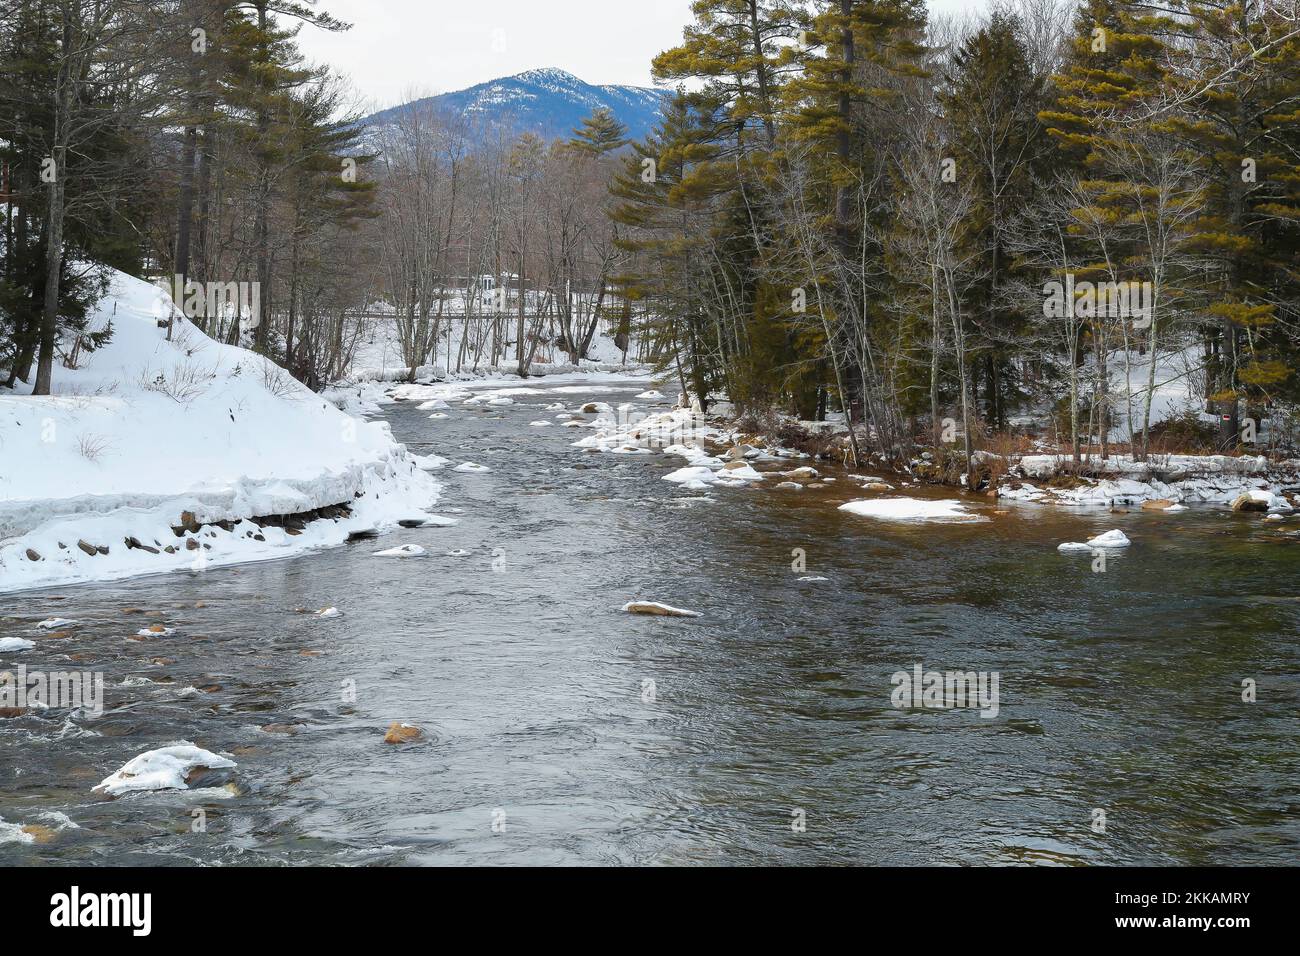 This river is a scenic river that flows from Saco Lake in Crawford Notch State Park down into Maine, and out to the Atlantic Ocean. The upper section Stock Photo